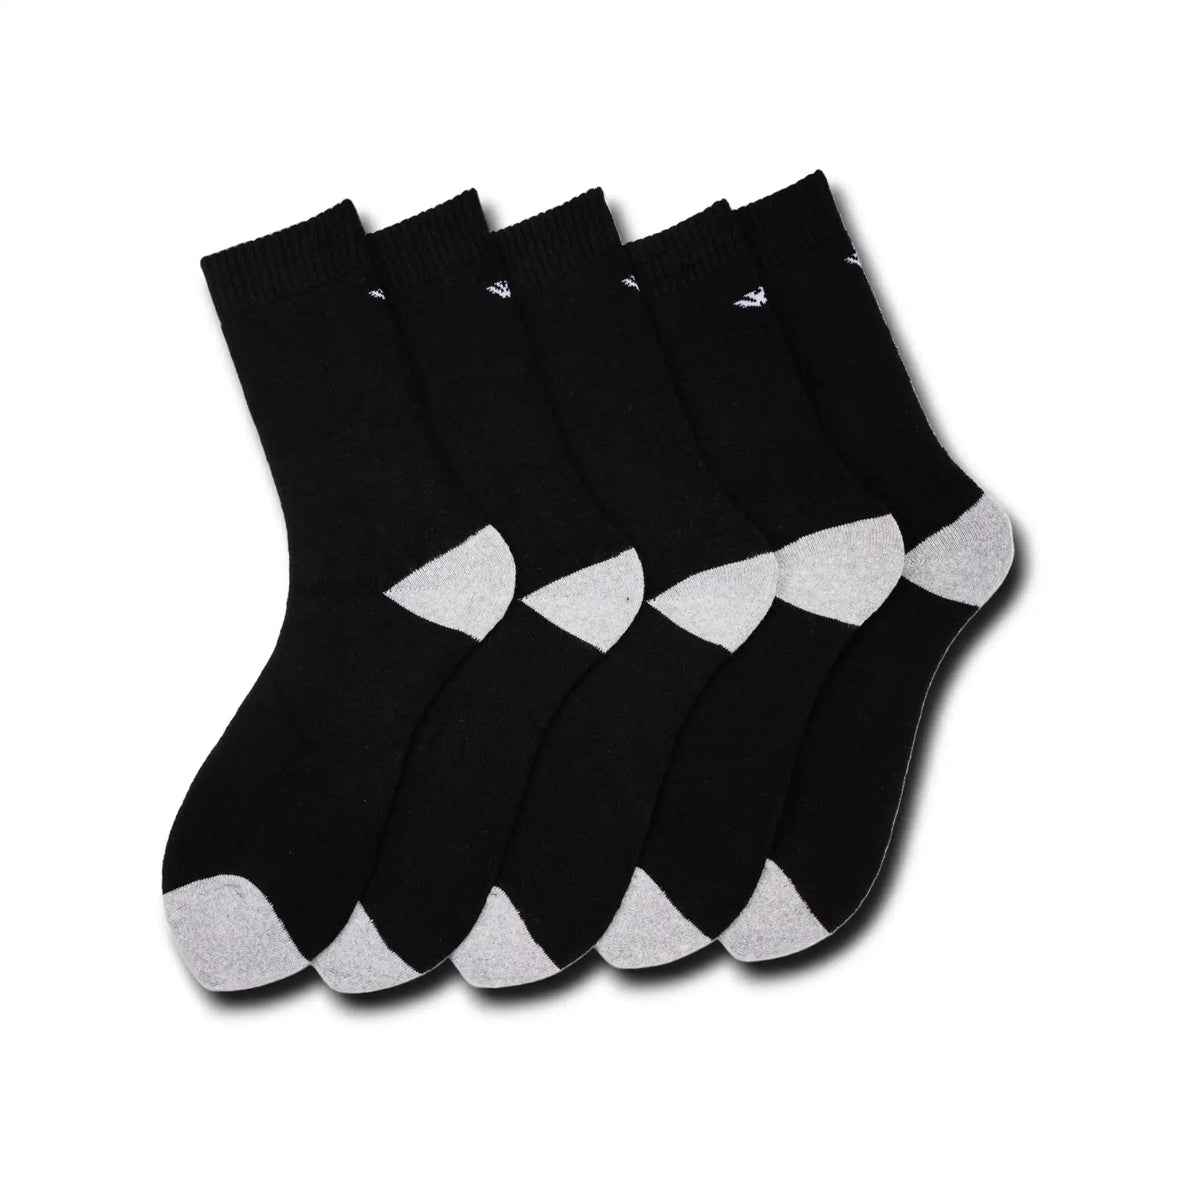 Young Wings Men's Black Colour Cotton Fabric Solid Full Length Socks - Pack of 3, Style no. M1-306 N